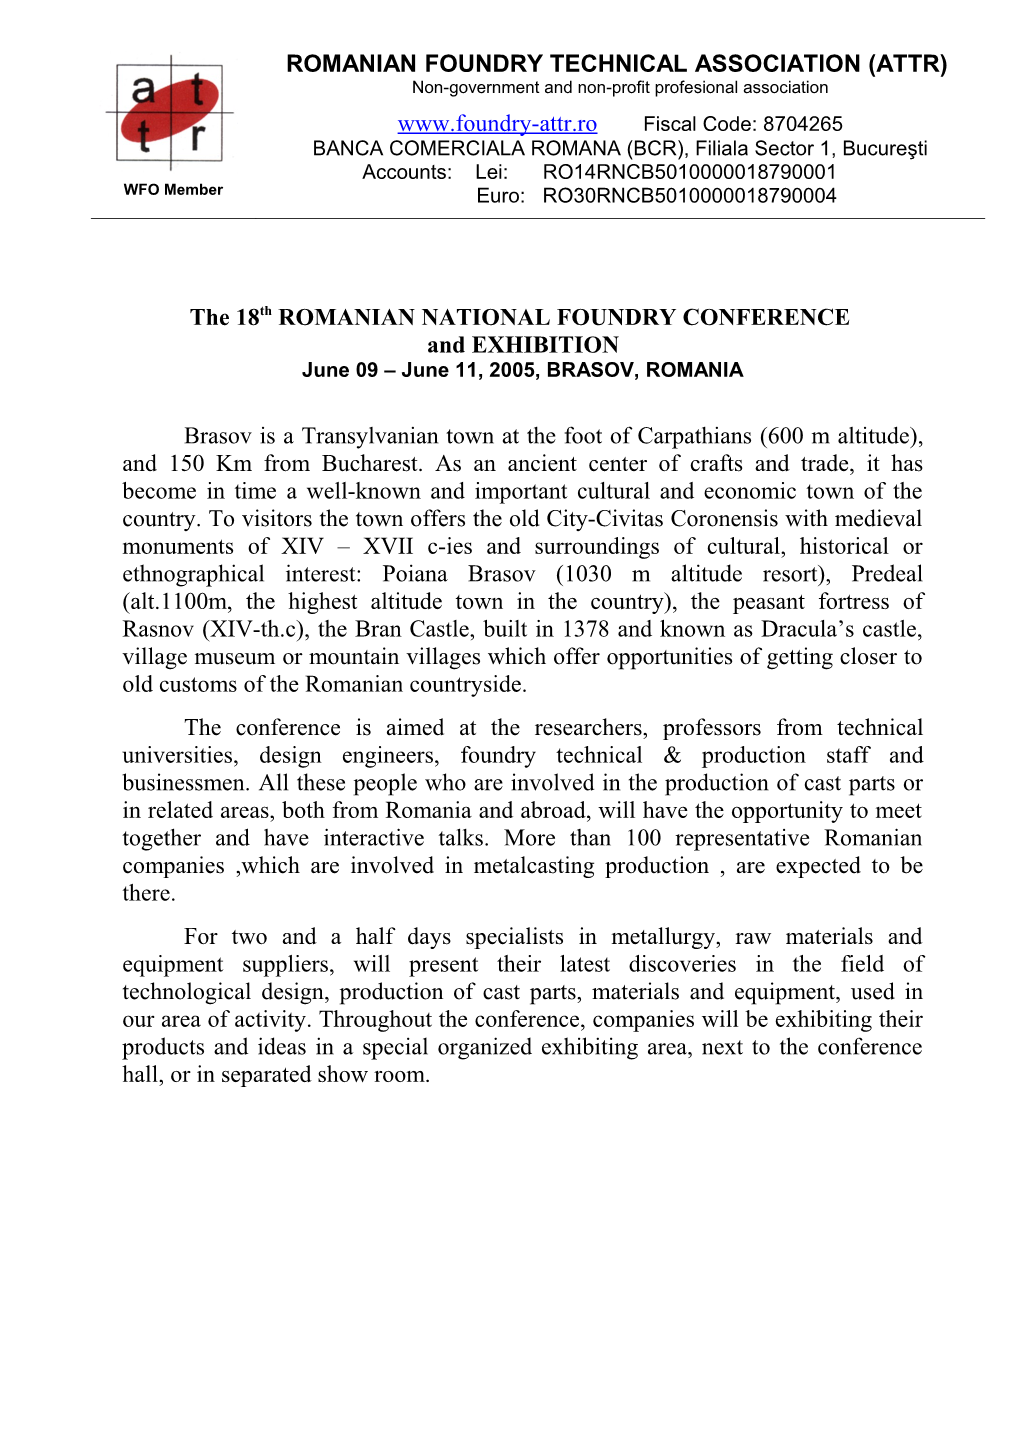 The 18Th ROMANIAN National Foundry Conference